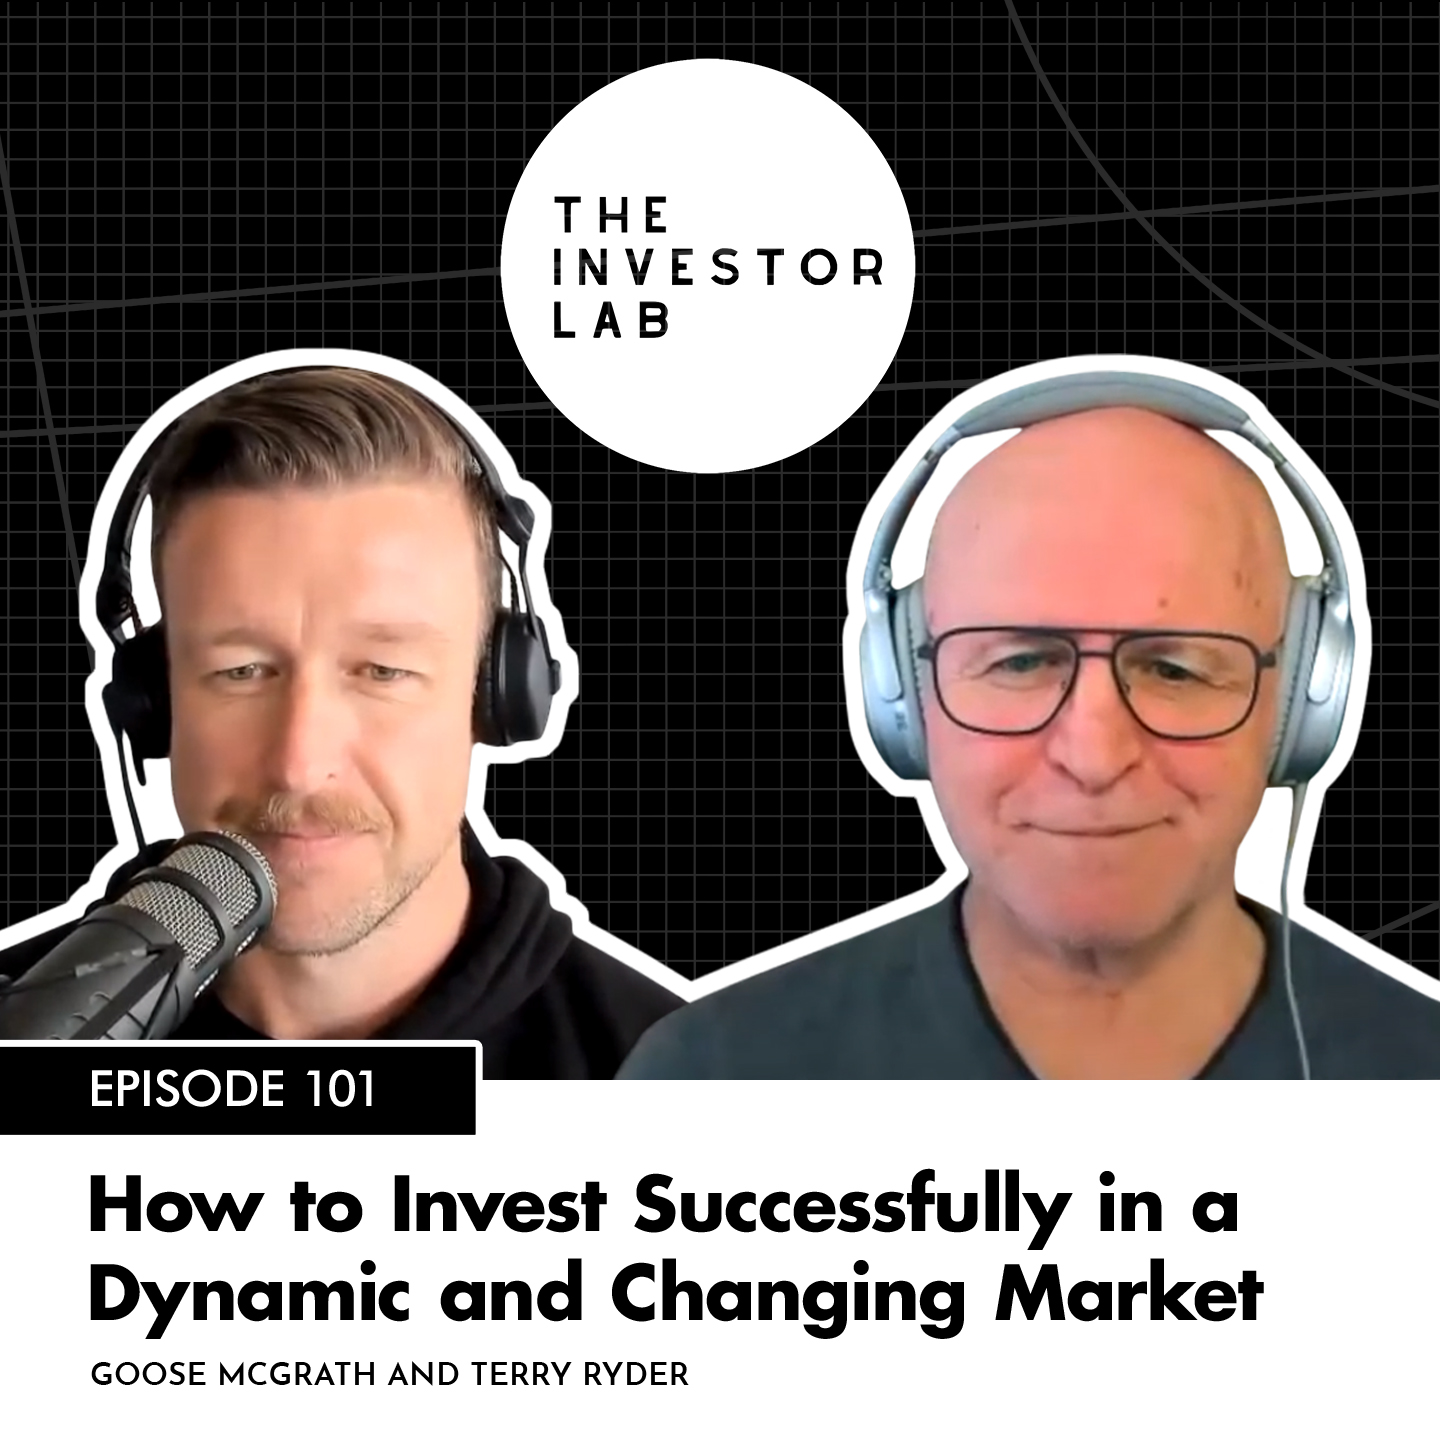 How to Invest Successfully in a Dynamic and Changing Market with Terry Ryder